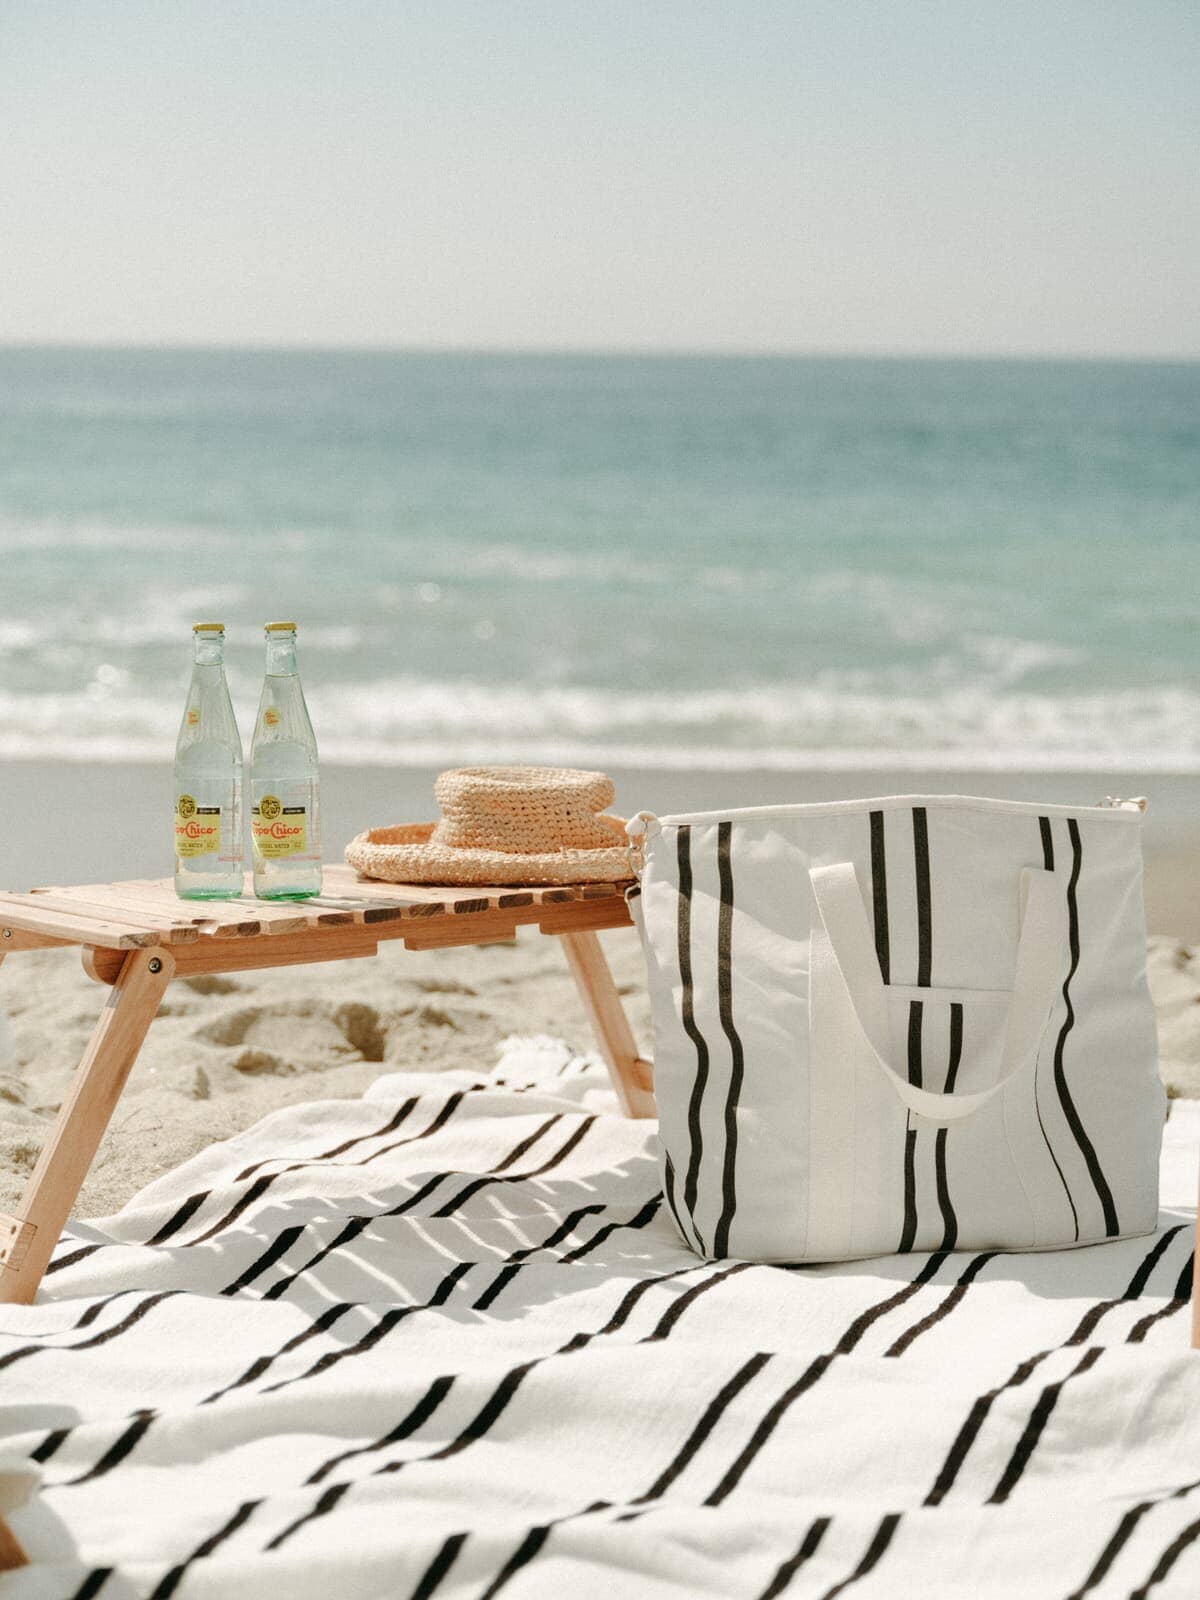 Beach picnic wit black two stripe cooler bag, table and blanket